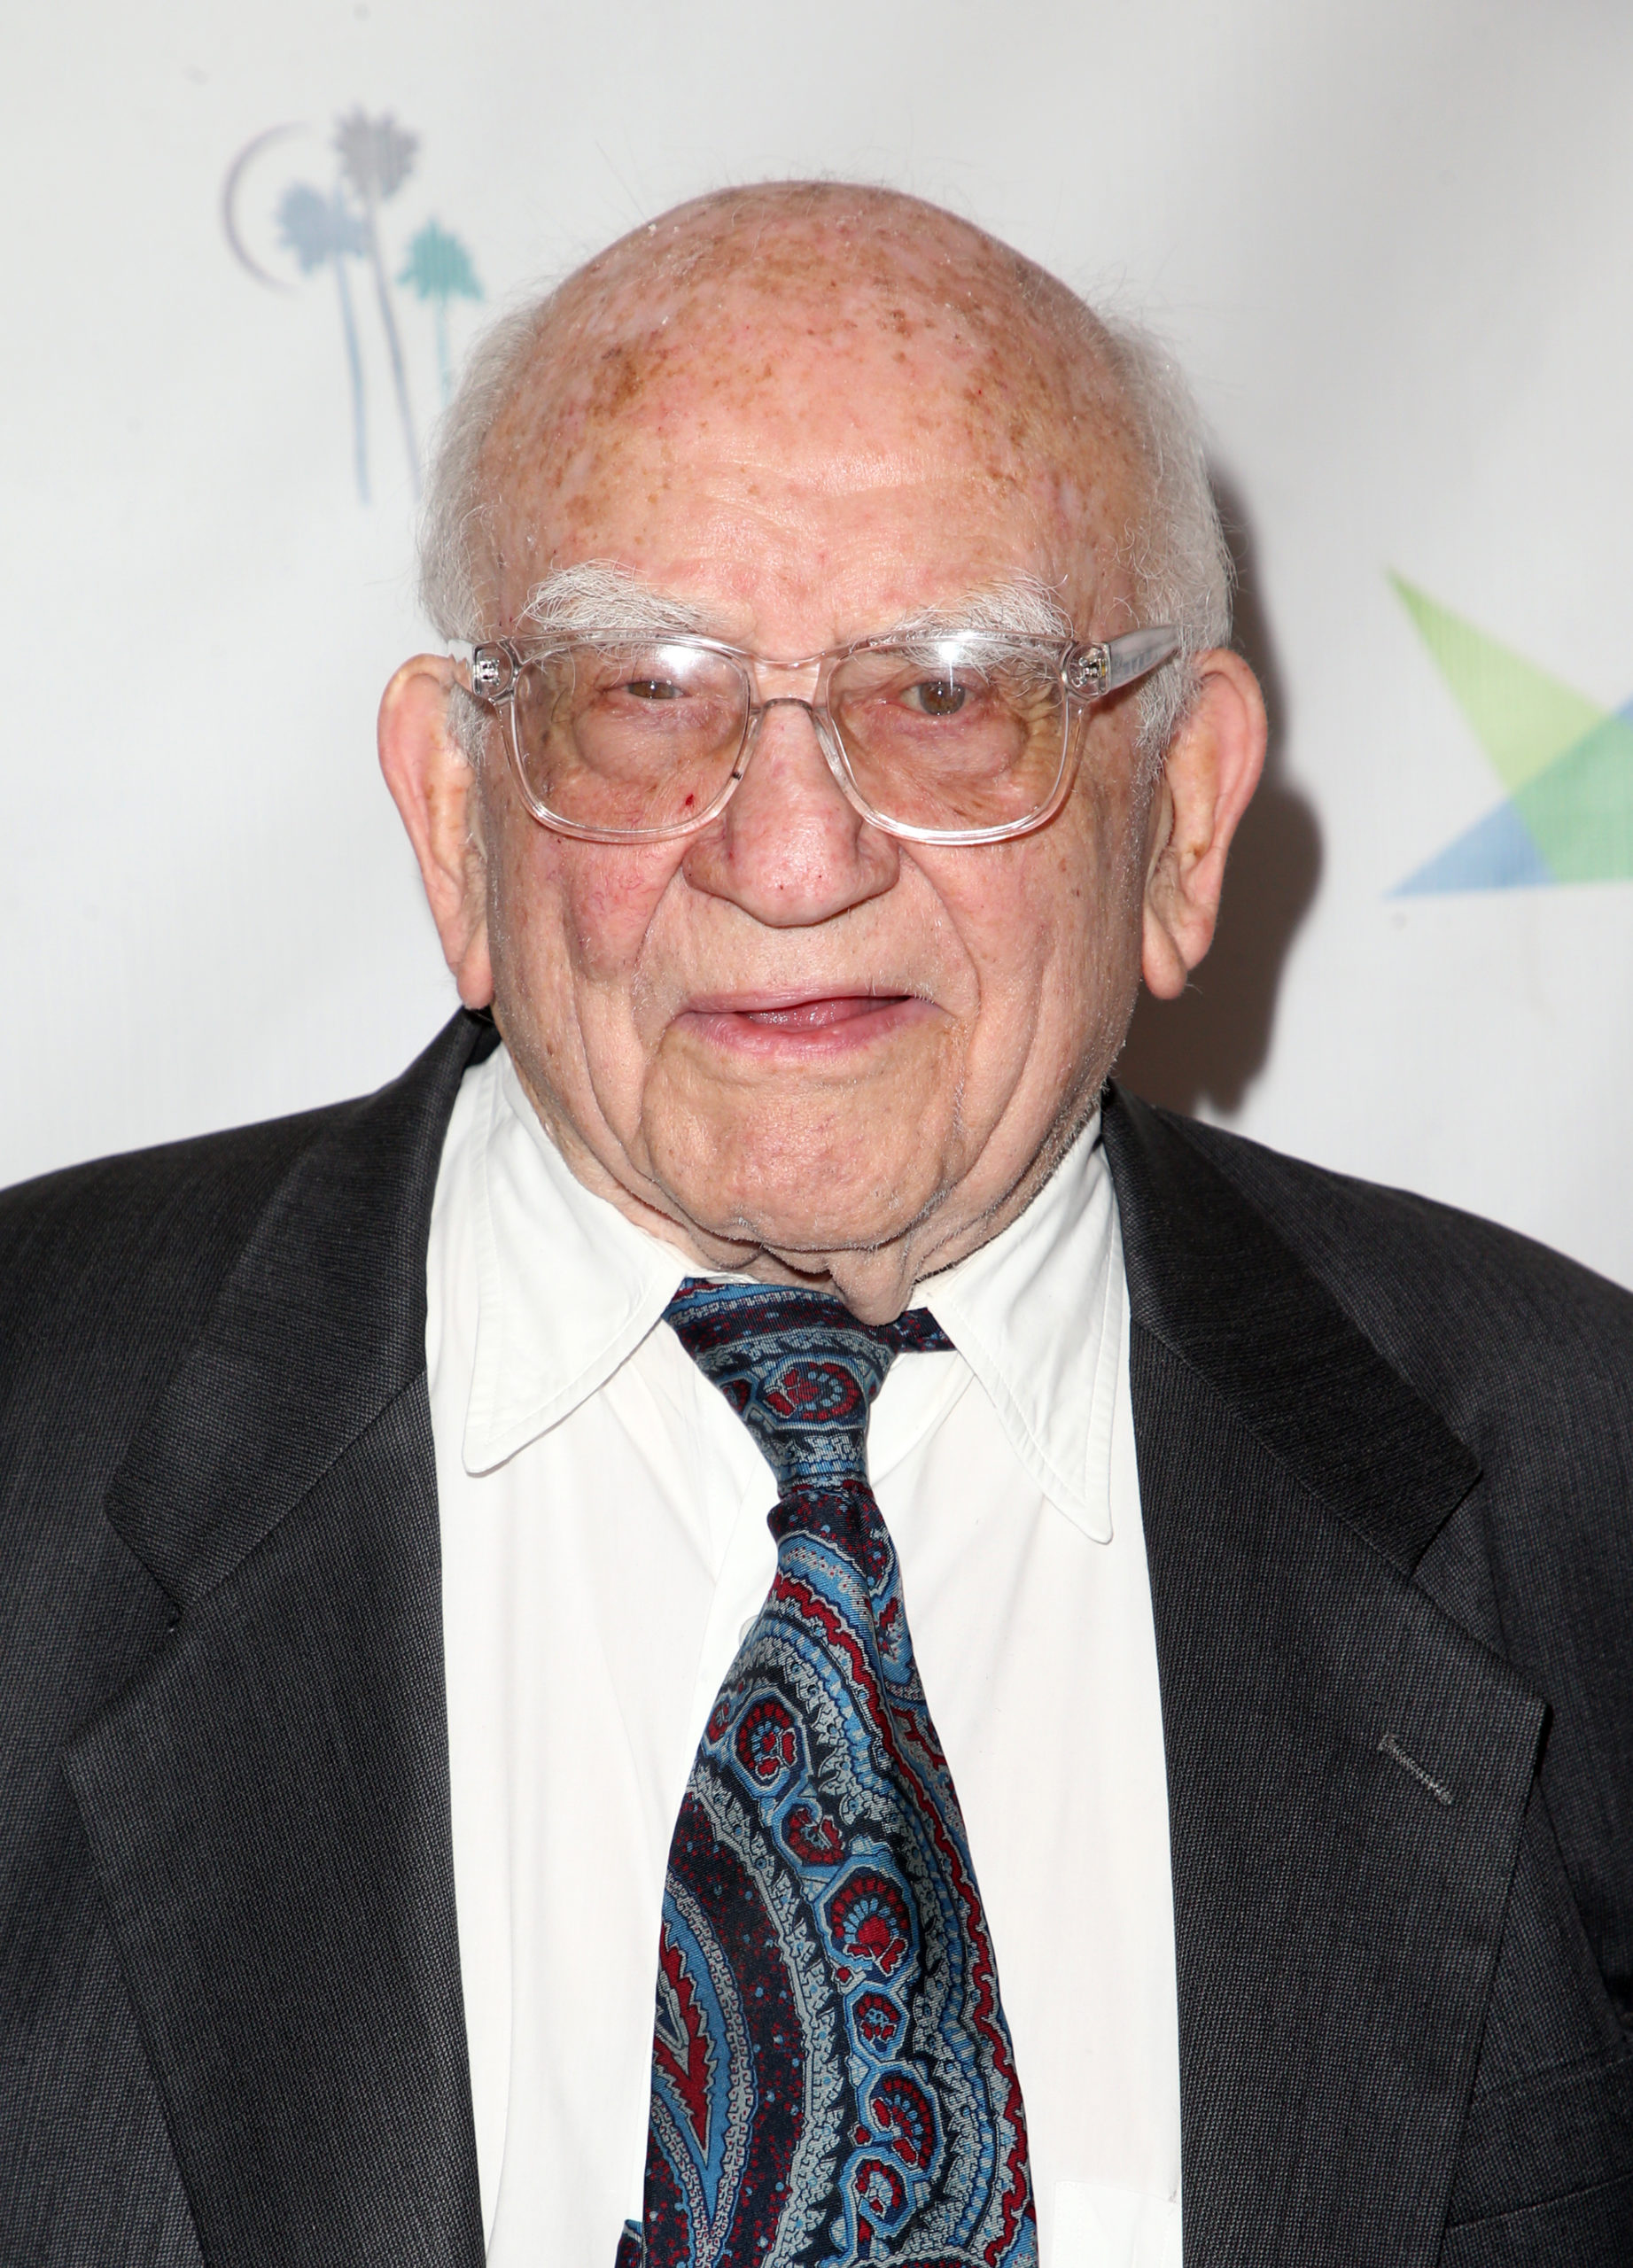 TV Star Ed Asner Passed Away Surrounded By Family